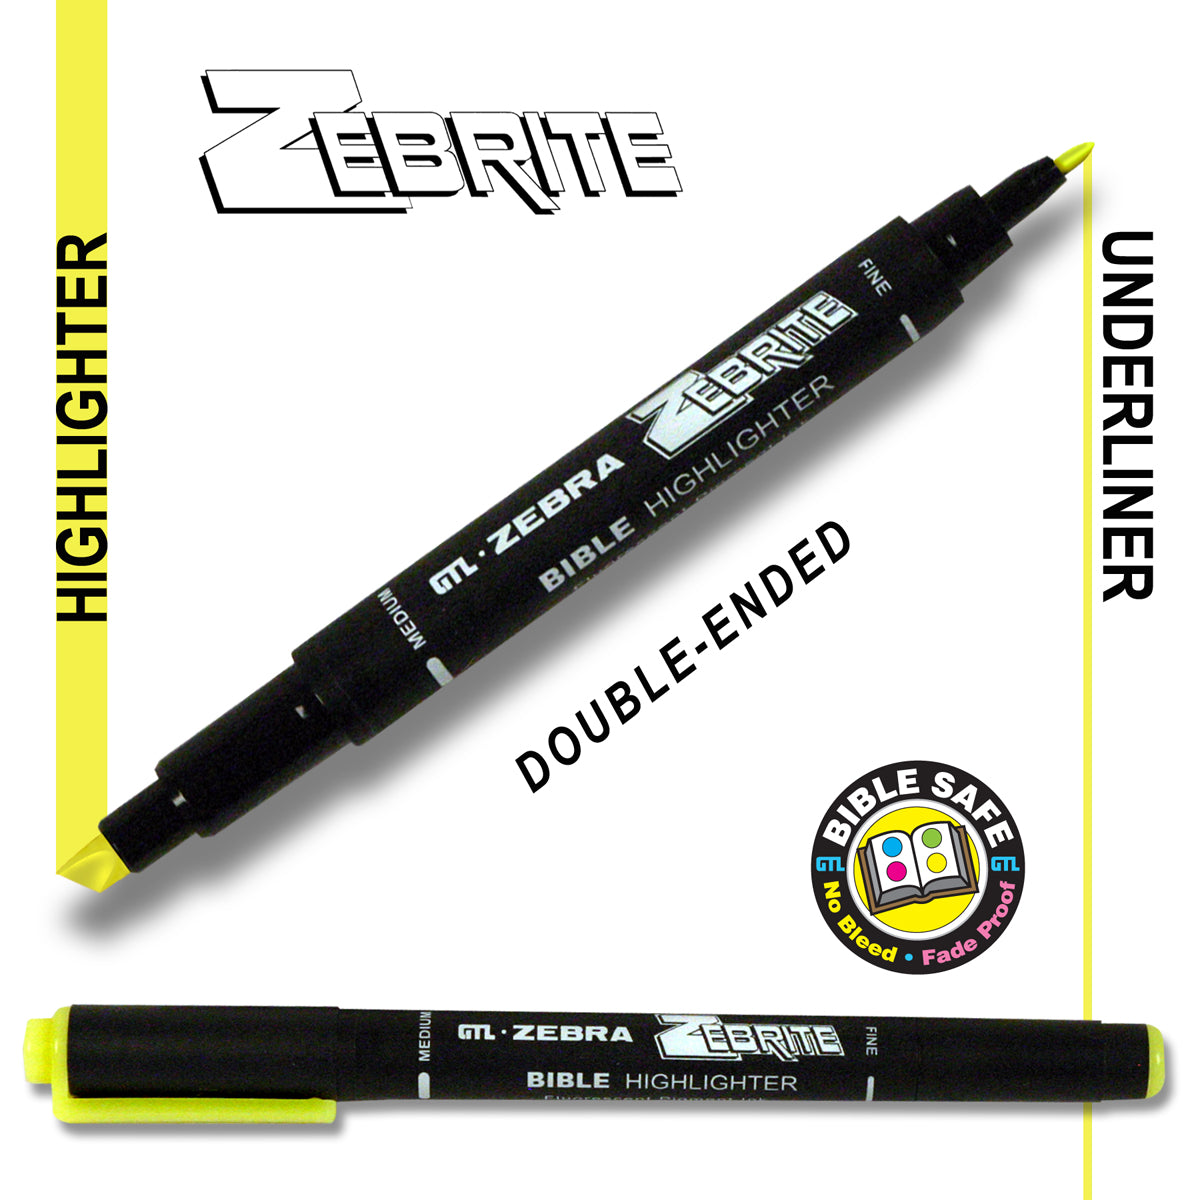 Zebrite Double-Ended Bible Highlighter, Fluorescent Pigment Ink (G.T. Luscombe Co., Inc.)